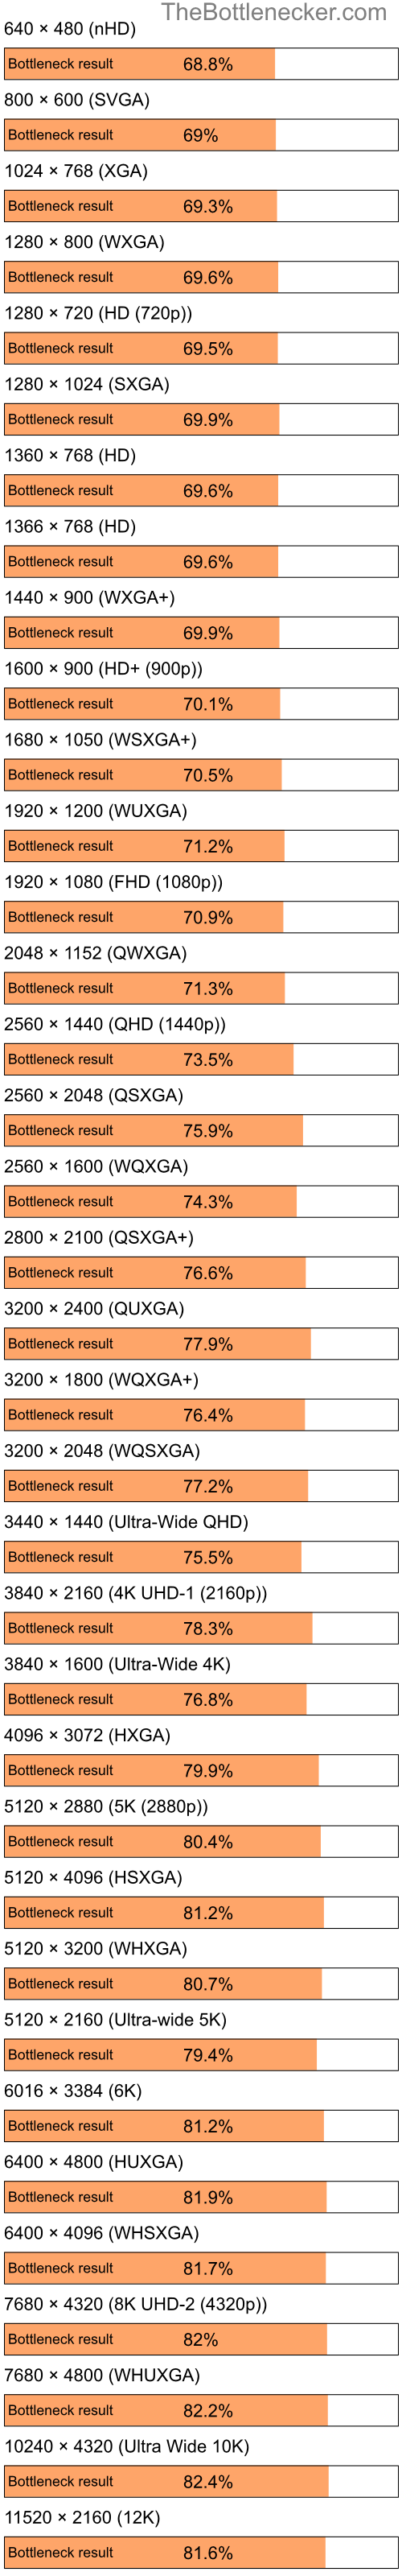 Bottleneck results by resolution for Intel Celeron and AMD Radeon HD 6290 in Graphic Card Intense Tasks